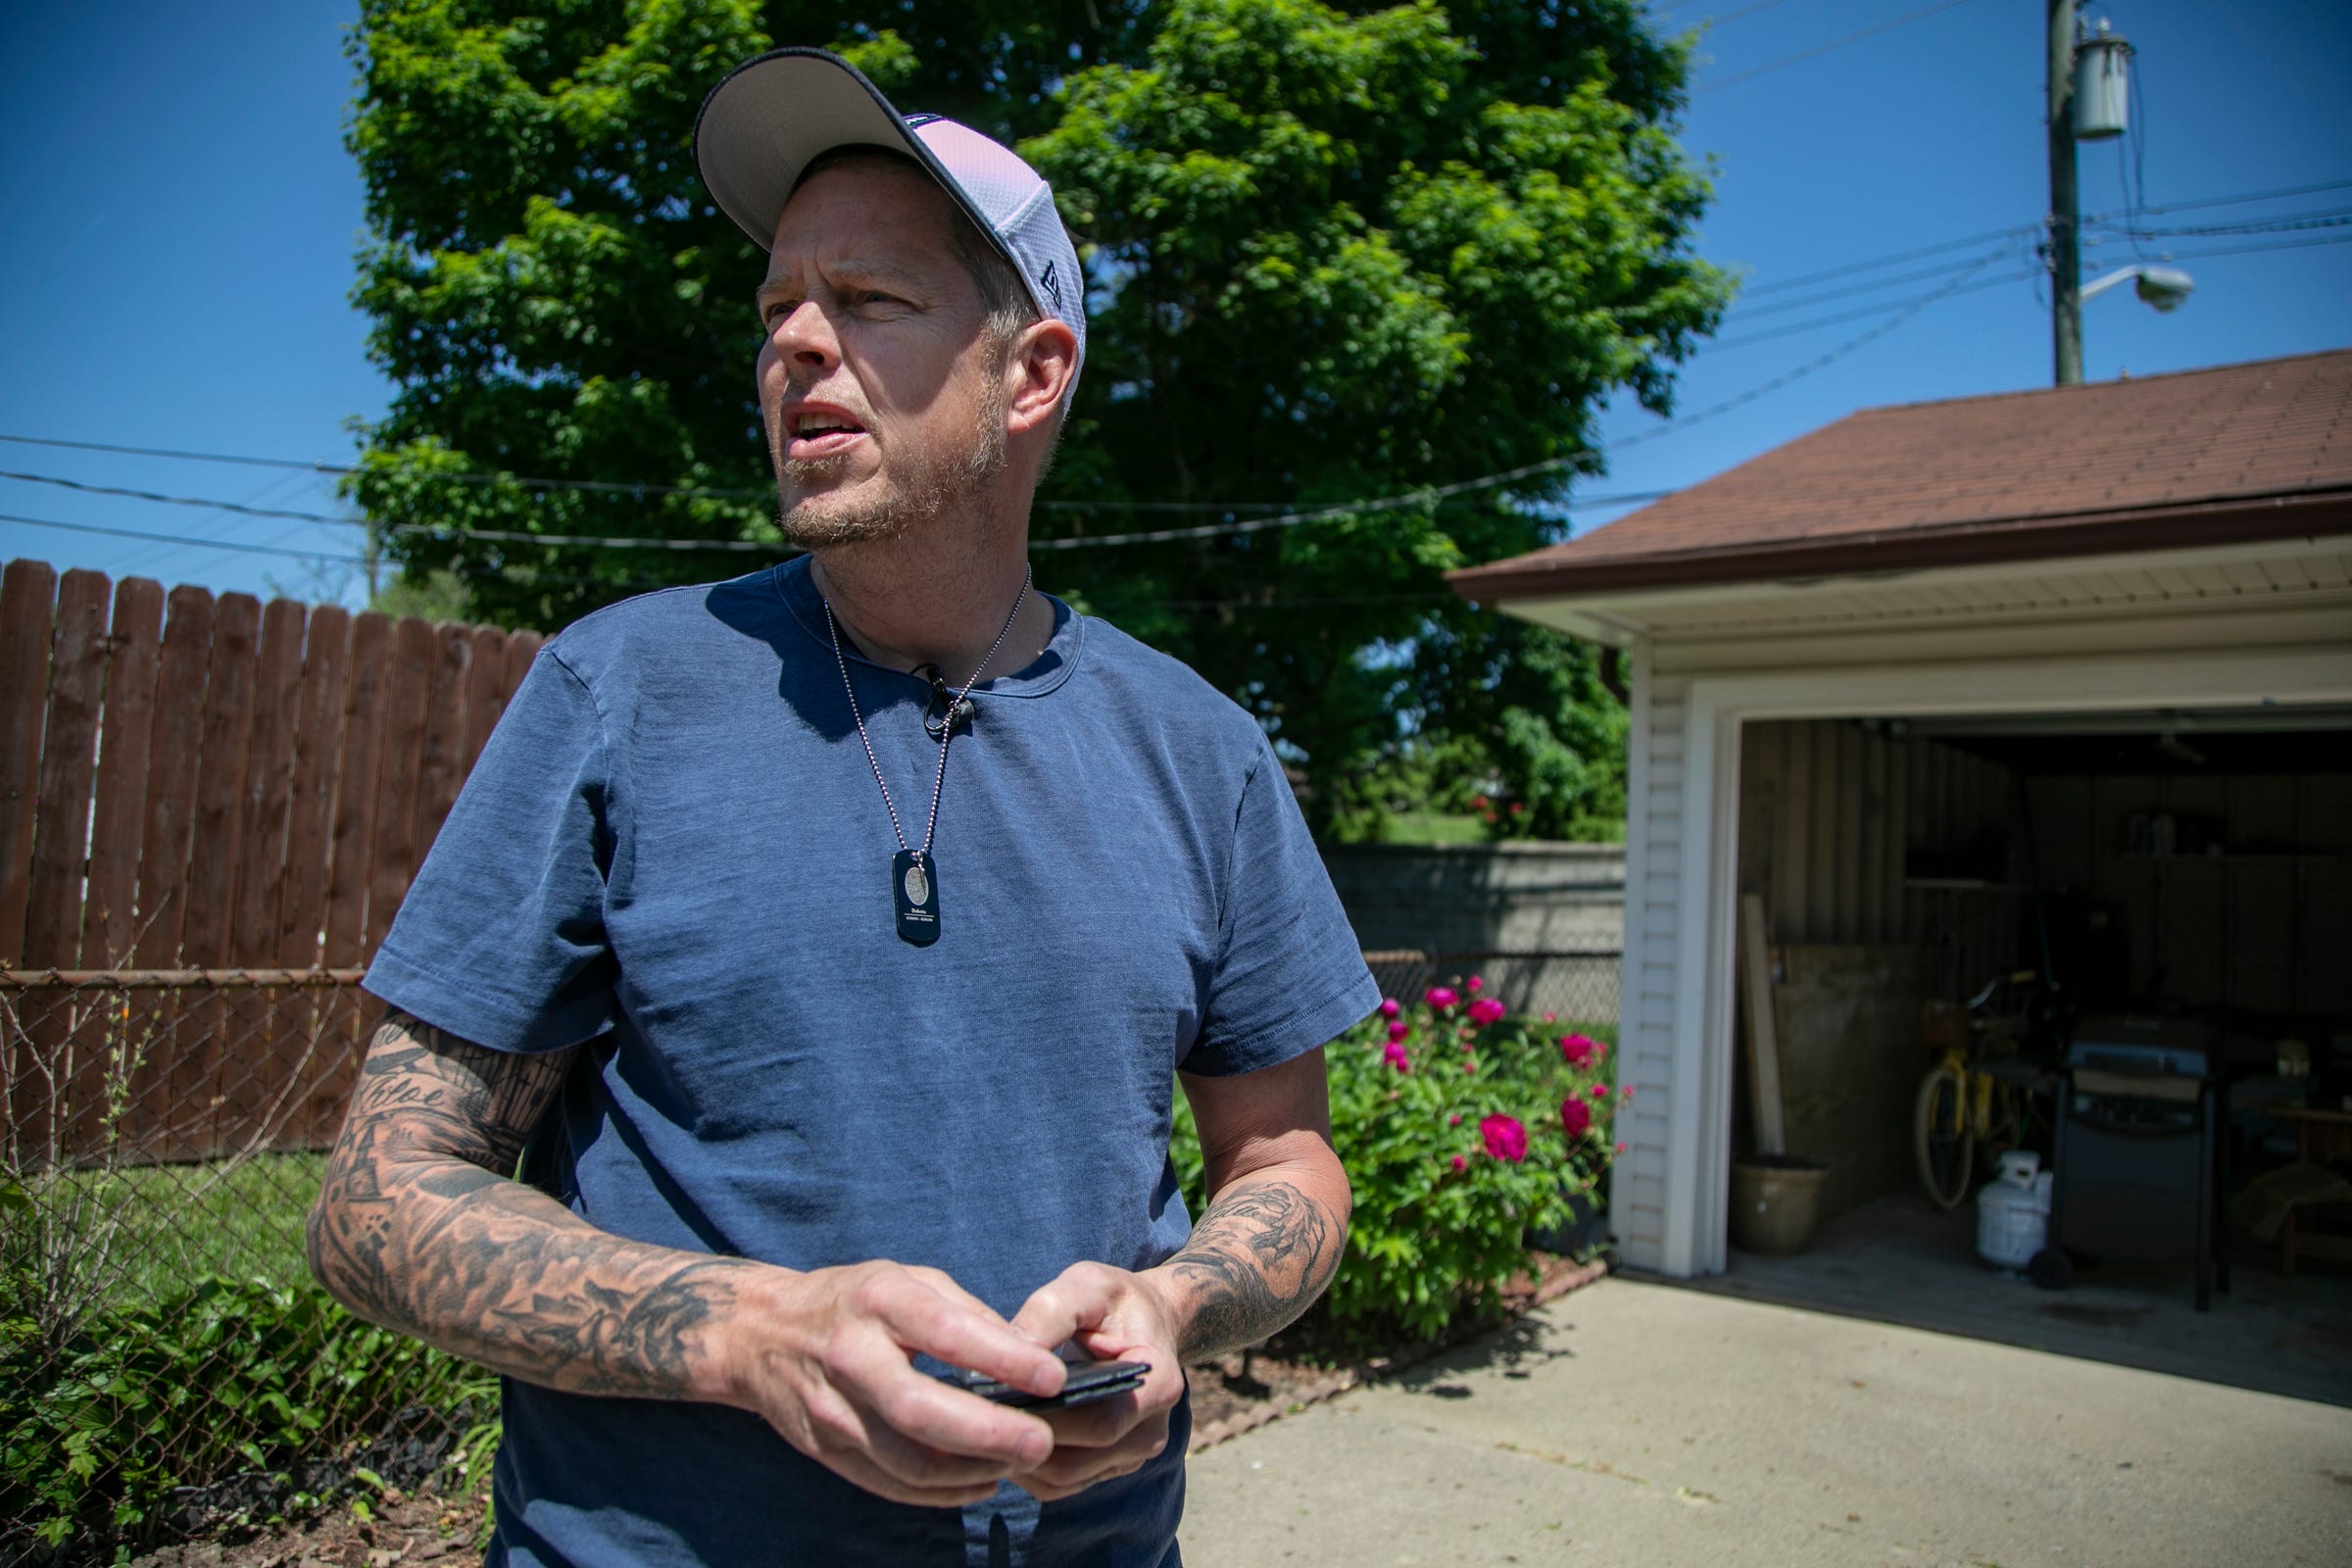 Andy Hopson, 51, of Livonia is a recovering addict who lost his son, Dakota, on May, 5, 2016, to a heroin overdose. He looks out as he describes the wallet he keeps in his truck that belonged to his son.